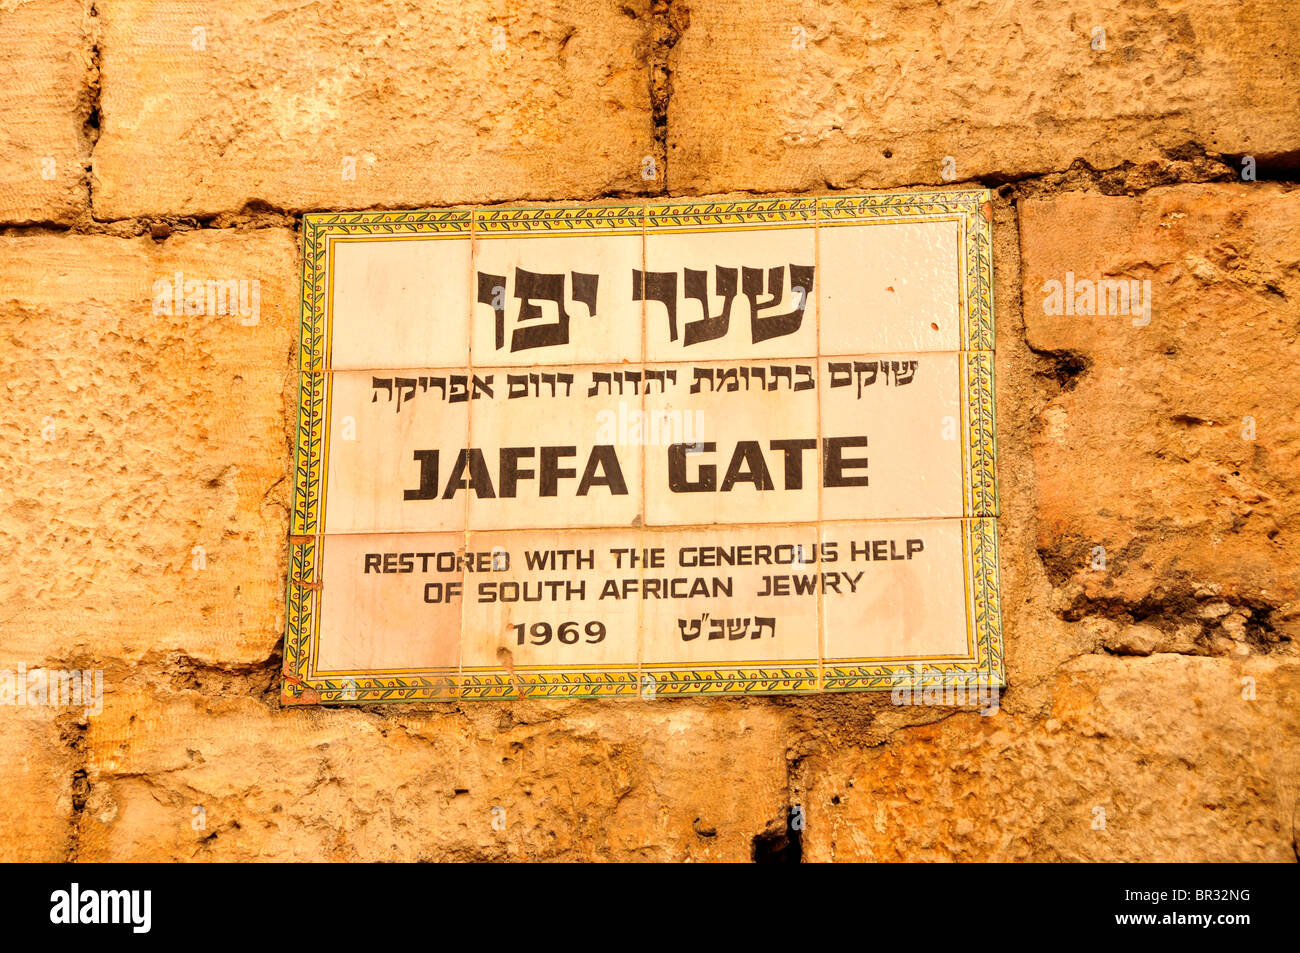 Road sign at Jaffa Gate, Jaffa Gate, by the entrance of old town Jerusalem, Israel, Middle East, the Orient Stock Photo